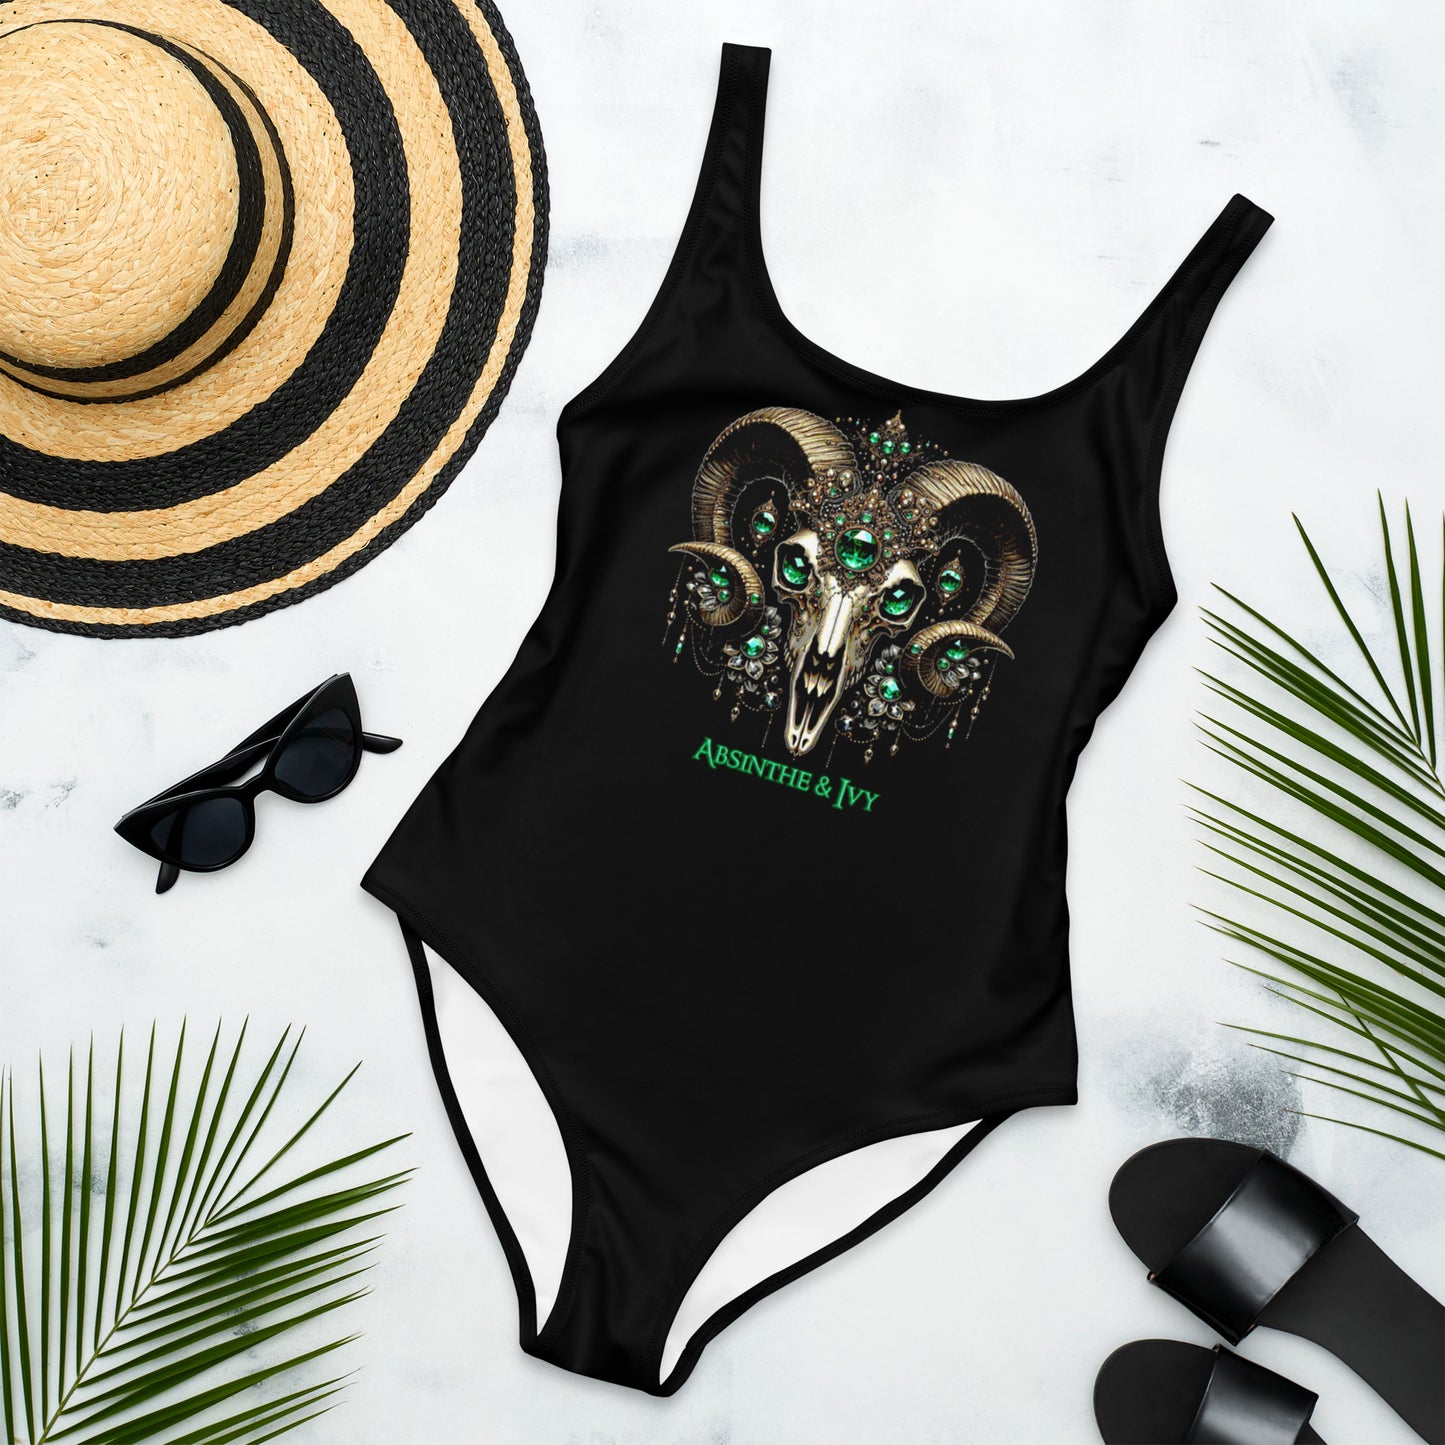 One-Piece Royal Ram Skull Gothic Swimsuit, Witchy witchcore aesthetic Bathing suit